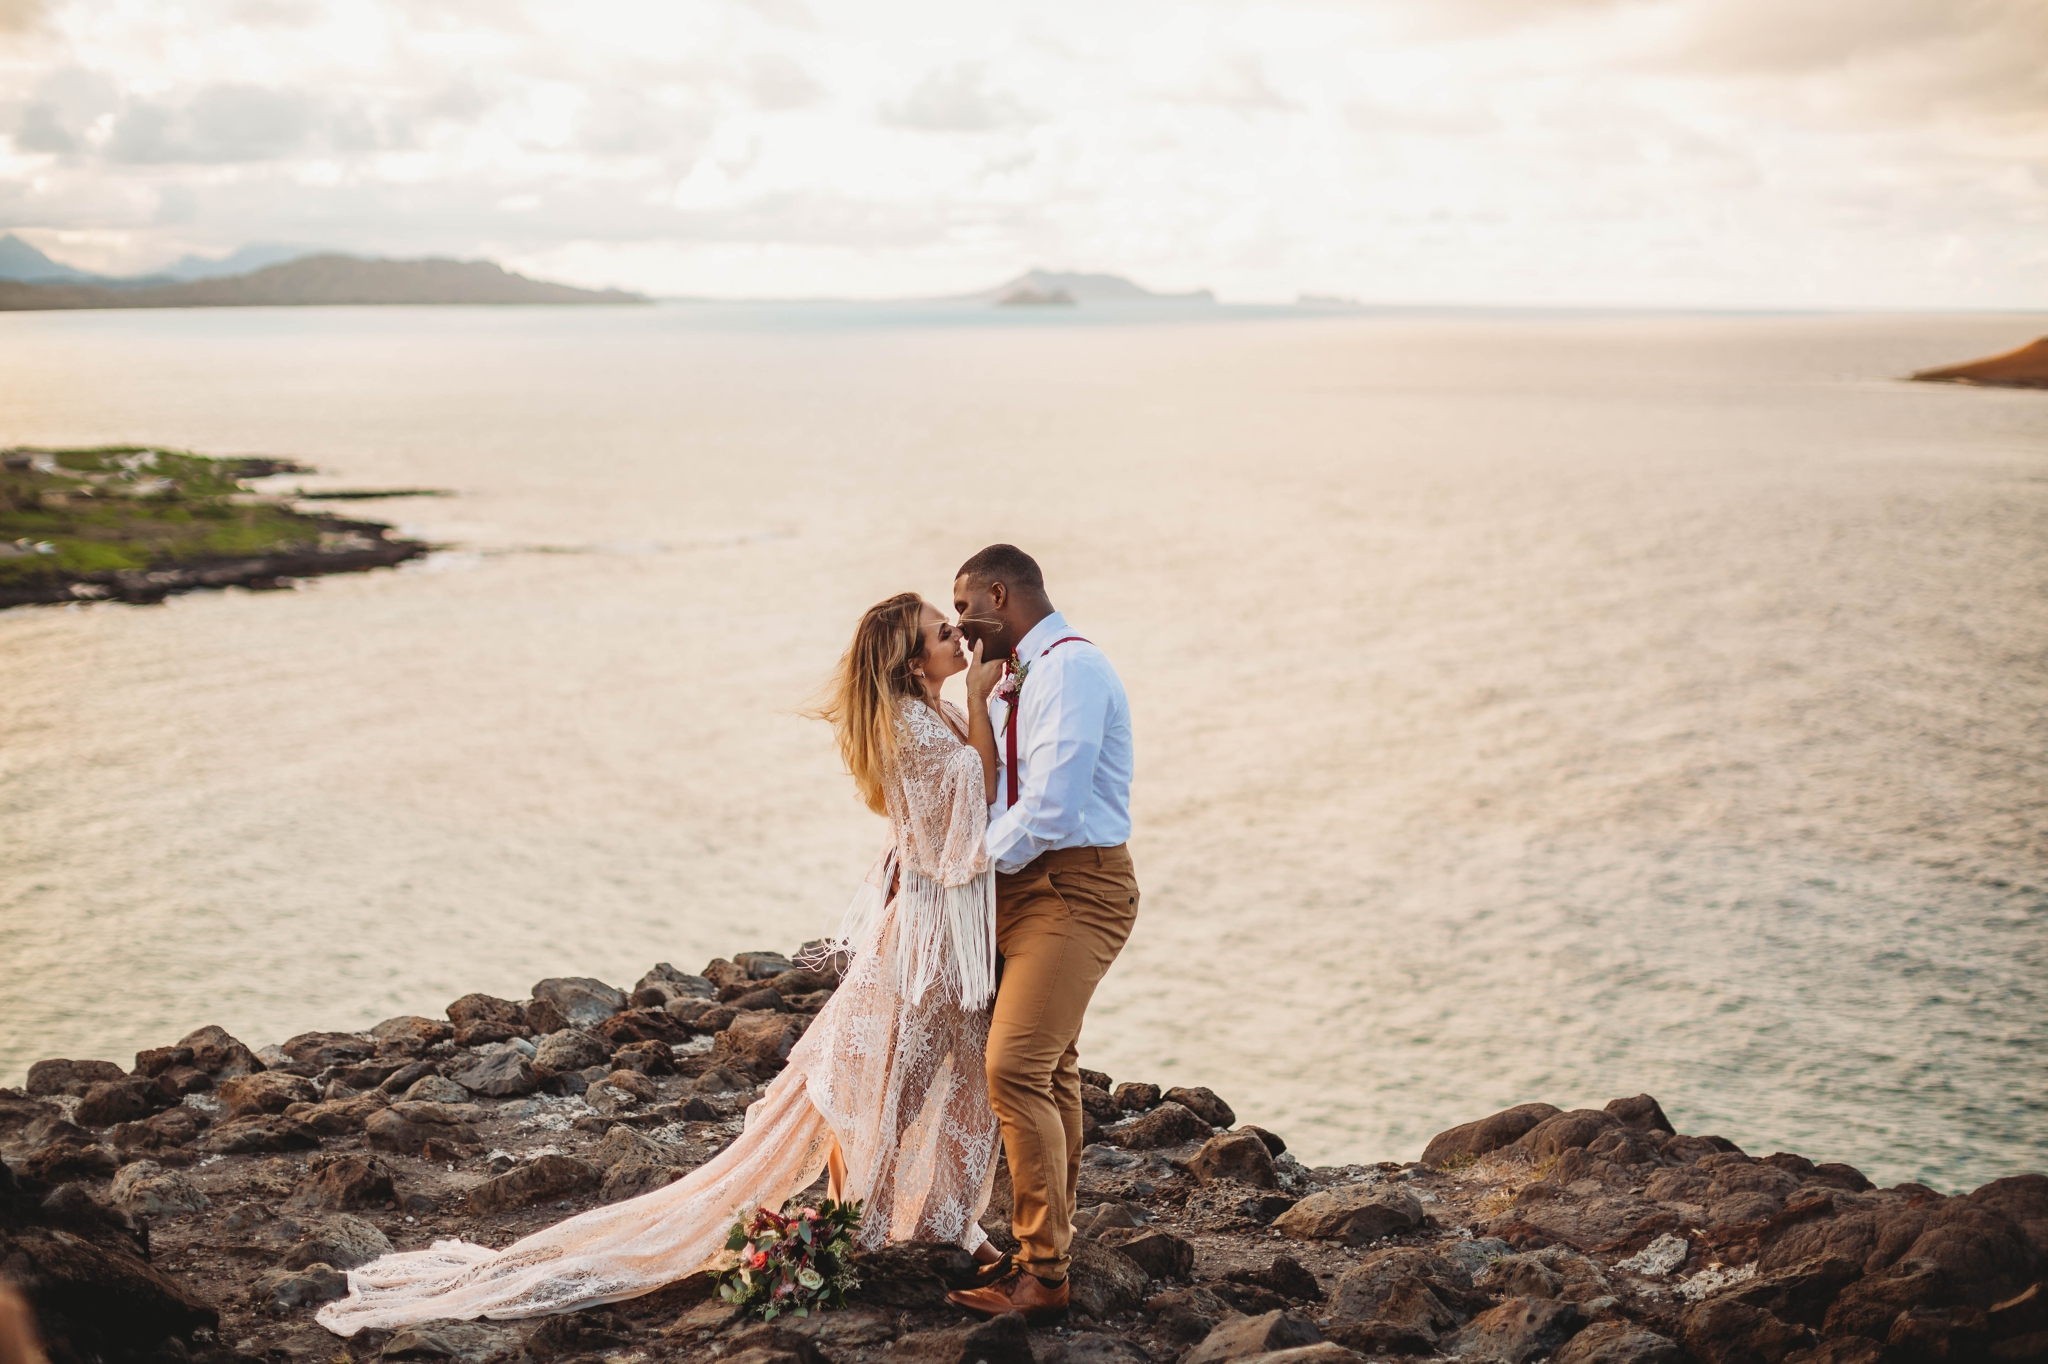  couple on the cliffs above Makapuu Beach at the Lookout, Waimanalo, HI - Oahu Hawaii Engagement Photographer - Bride in a flowy fringe boho wedding dress - lanikai lookout - deutsche hochzeits fotografin in hawaii - smal1 - dark and moody - true to 